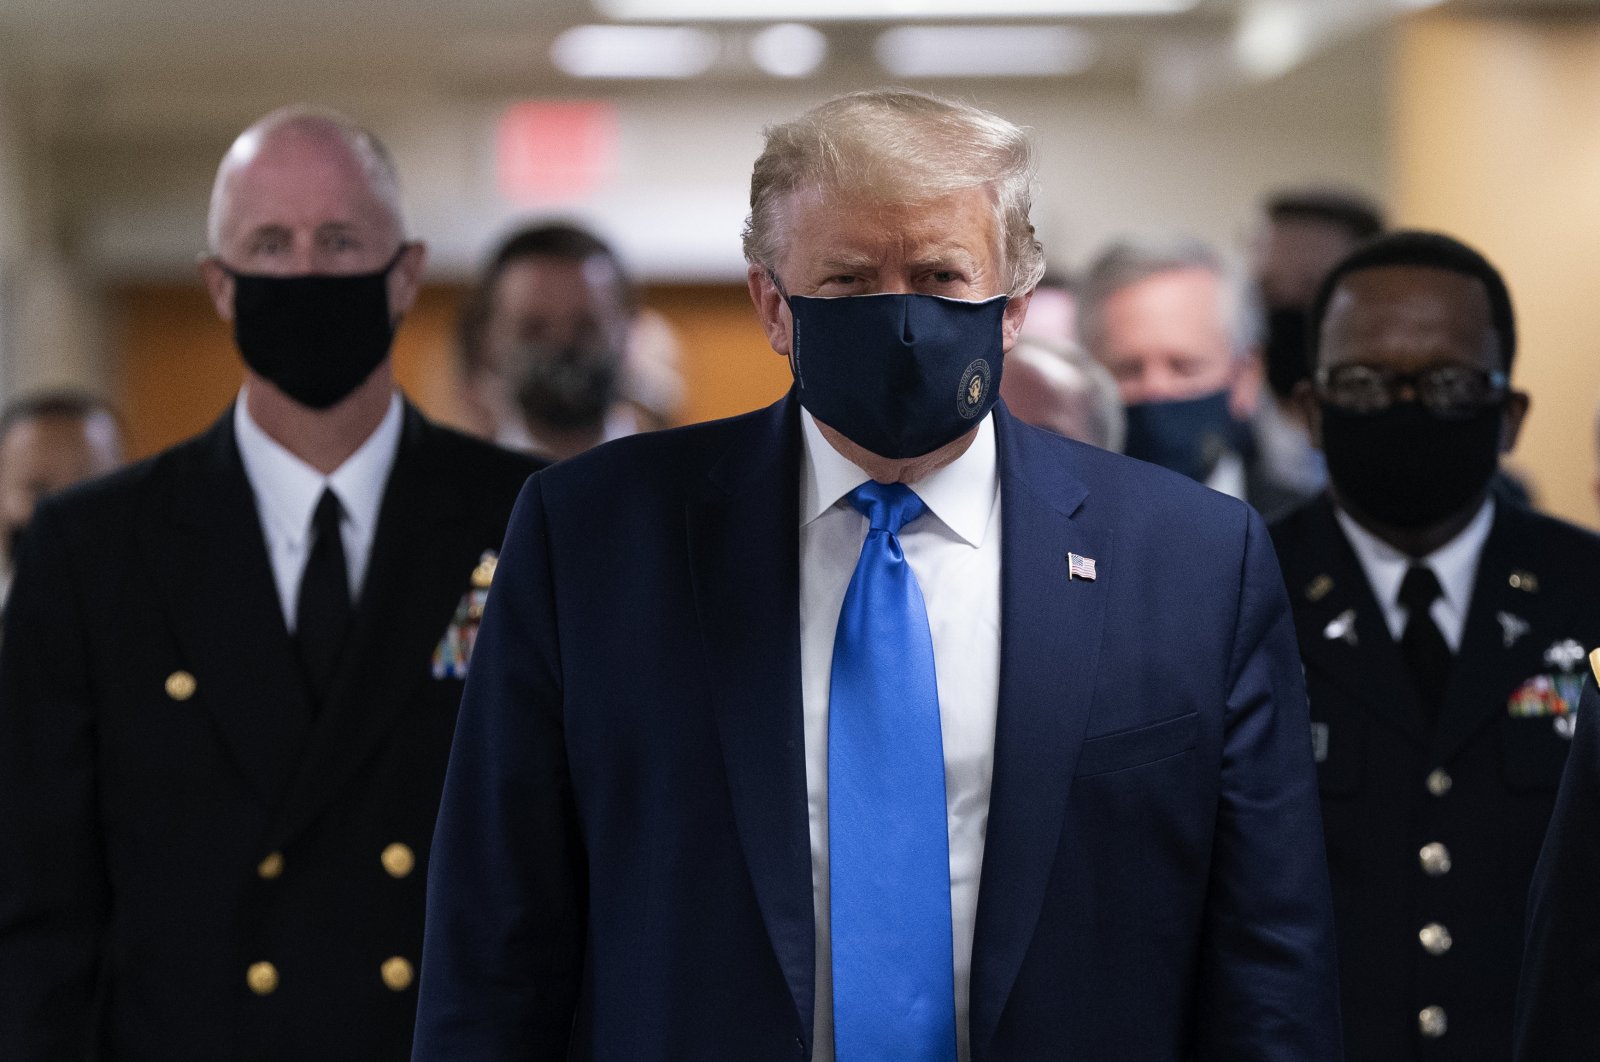 U.S. President Donald Trump wears a face mask as he visits a military medical center in Bethesda, U.S., July 11, 2020. (EPA Photo)